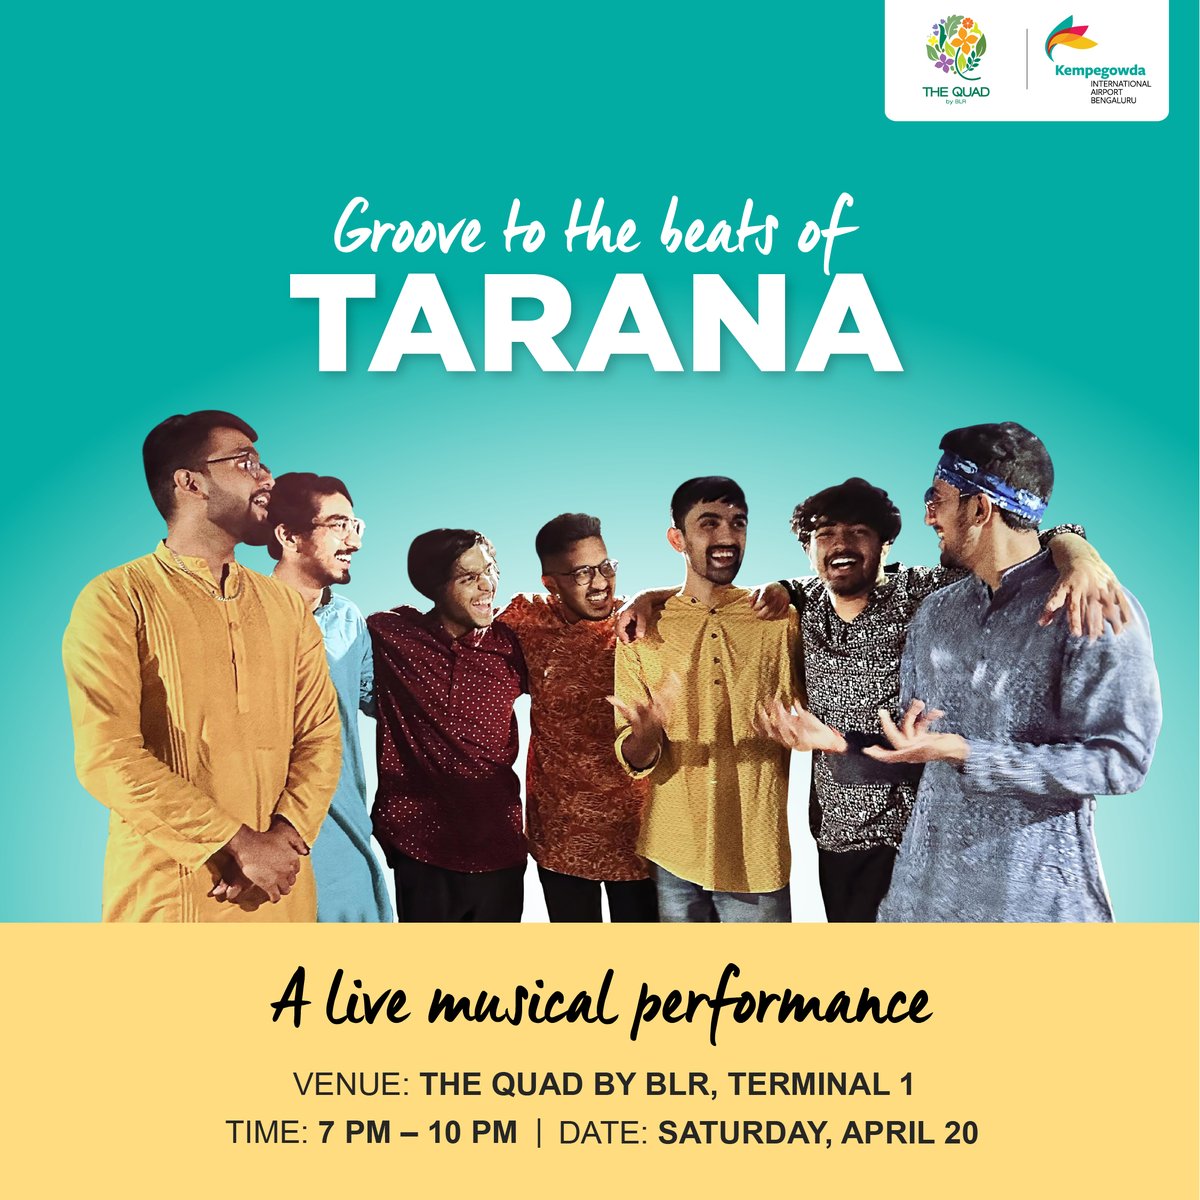 The Quad by BLR is excited to present Tarana. Come join us for an evening filled with lively beats and fantastic melodies. Share the news and invite your friends to join the fun! #BLRAirport #musicfestival #nightlifeatBLR #theQuadbyBLR #airportvibes #bangalorenightlife…